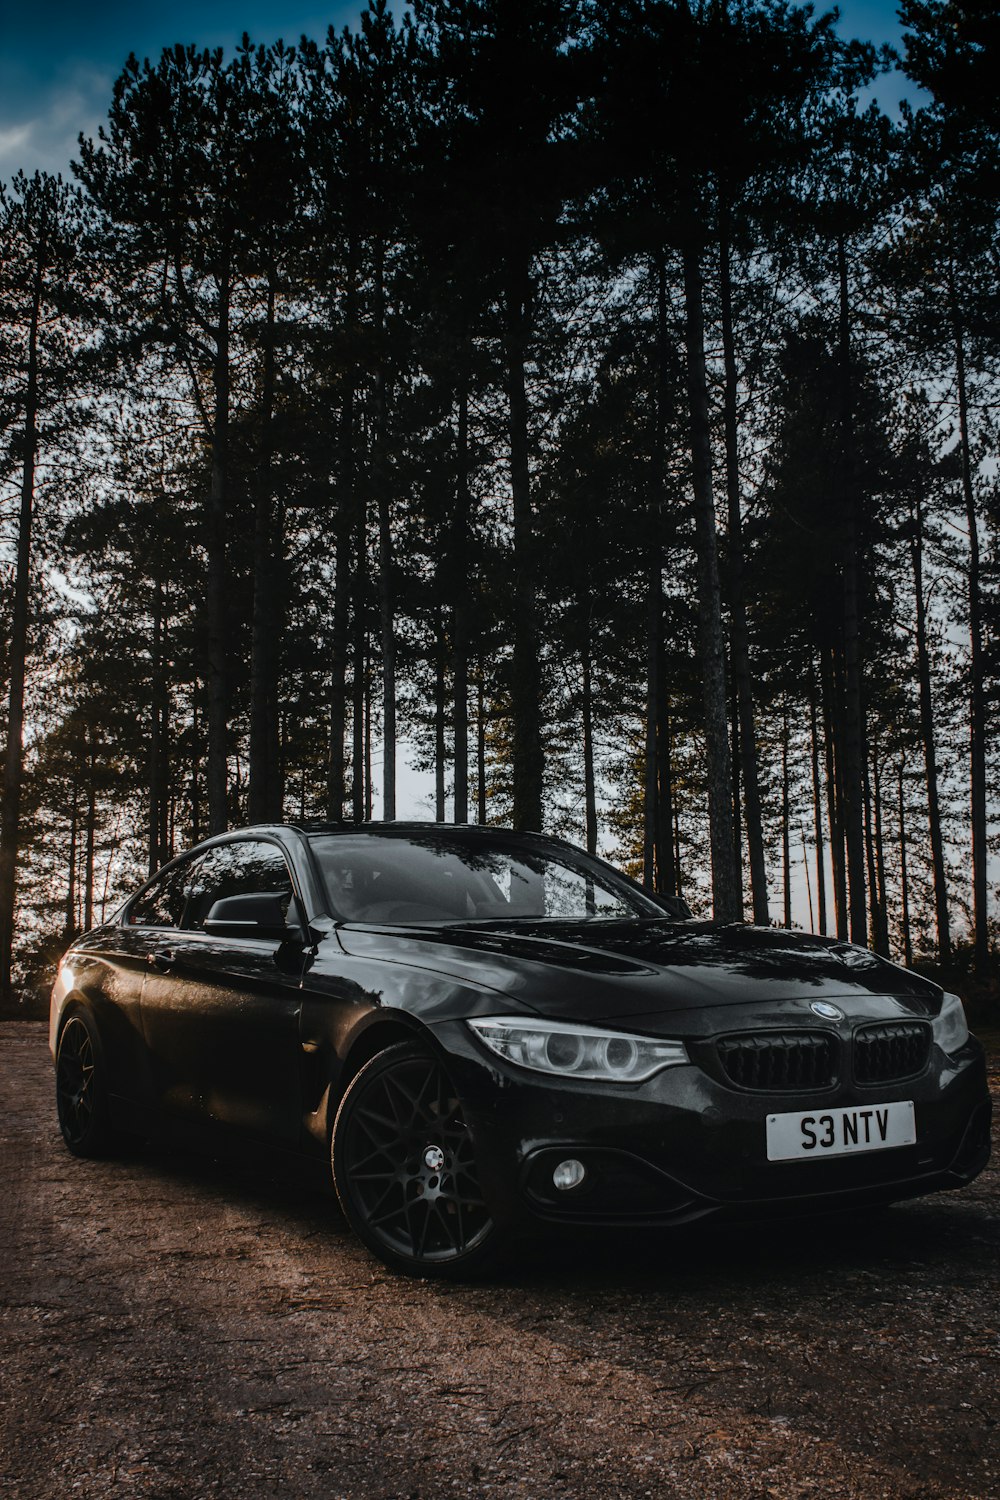 black bmw m 3 on forest during daytime